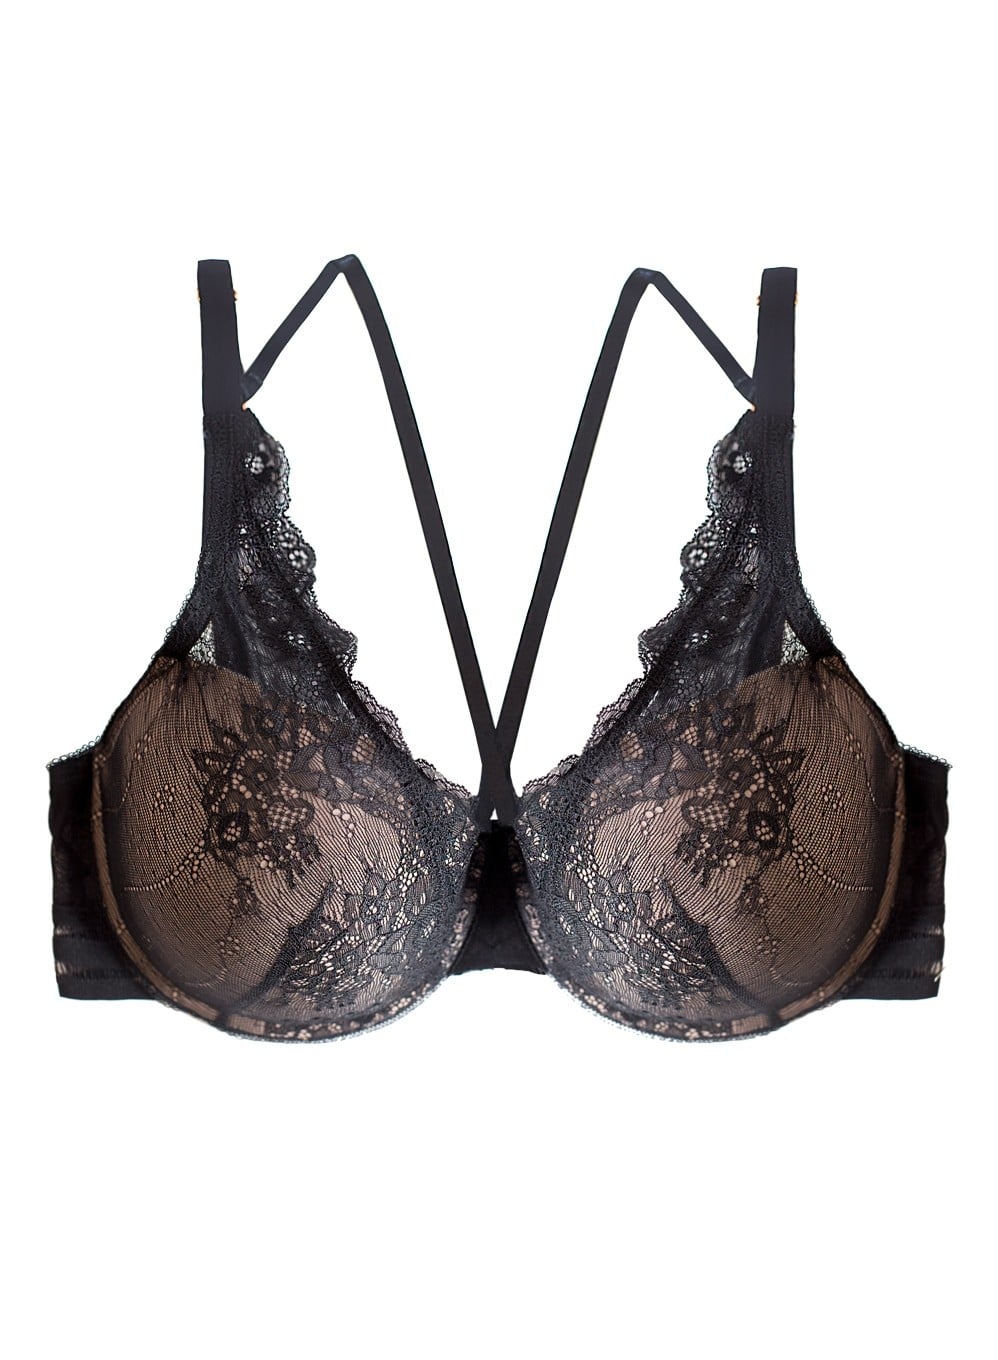 Ring the Alarm! 9 Super Sultry Bras For Curvy Ladies | Essence